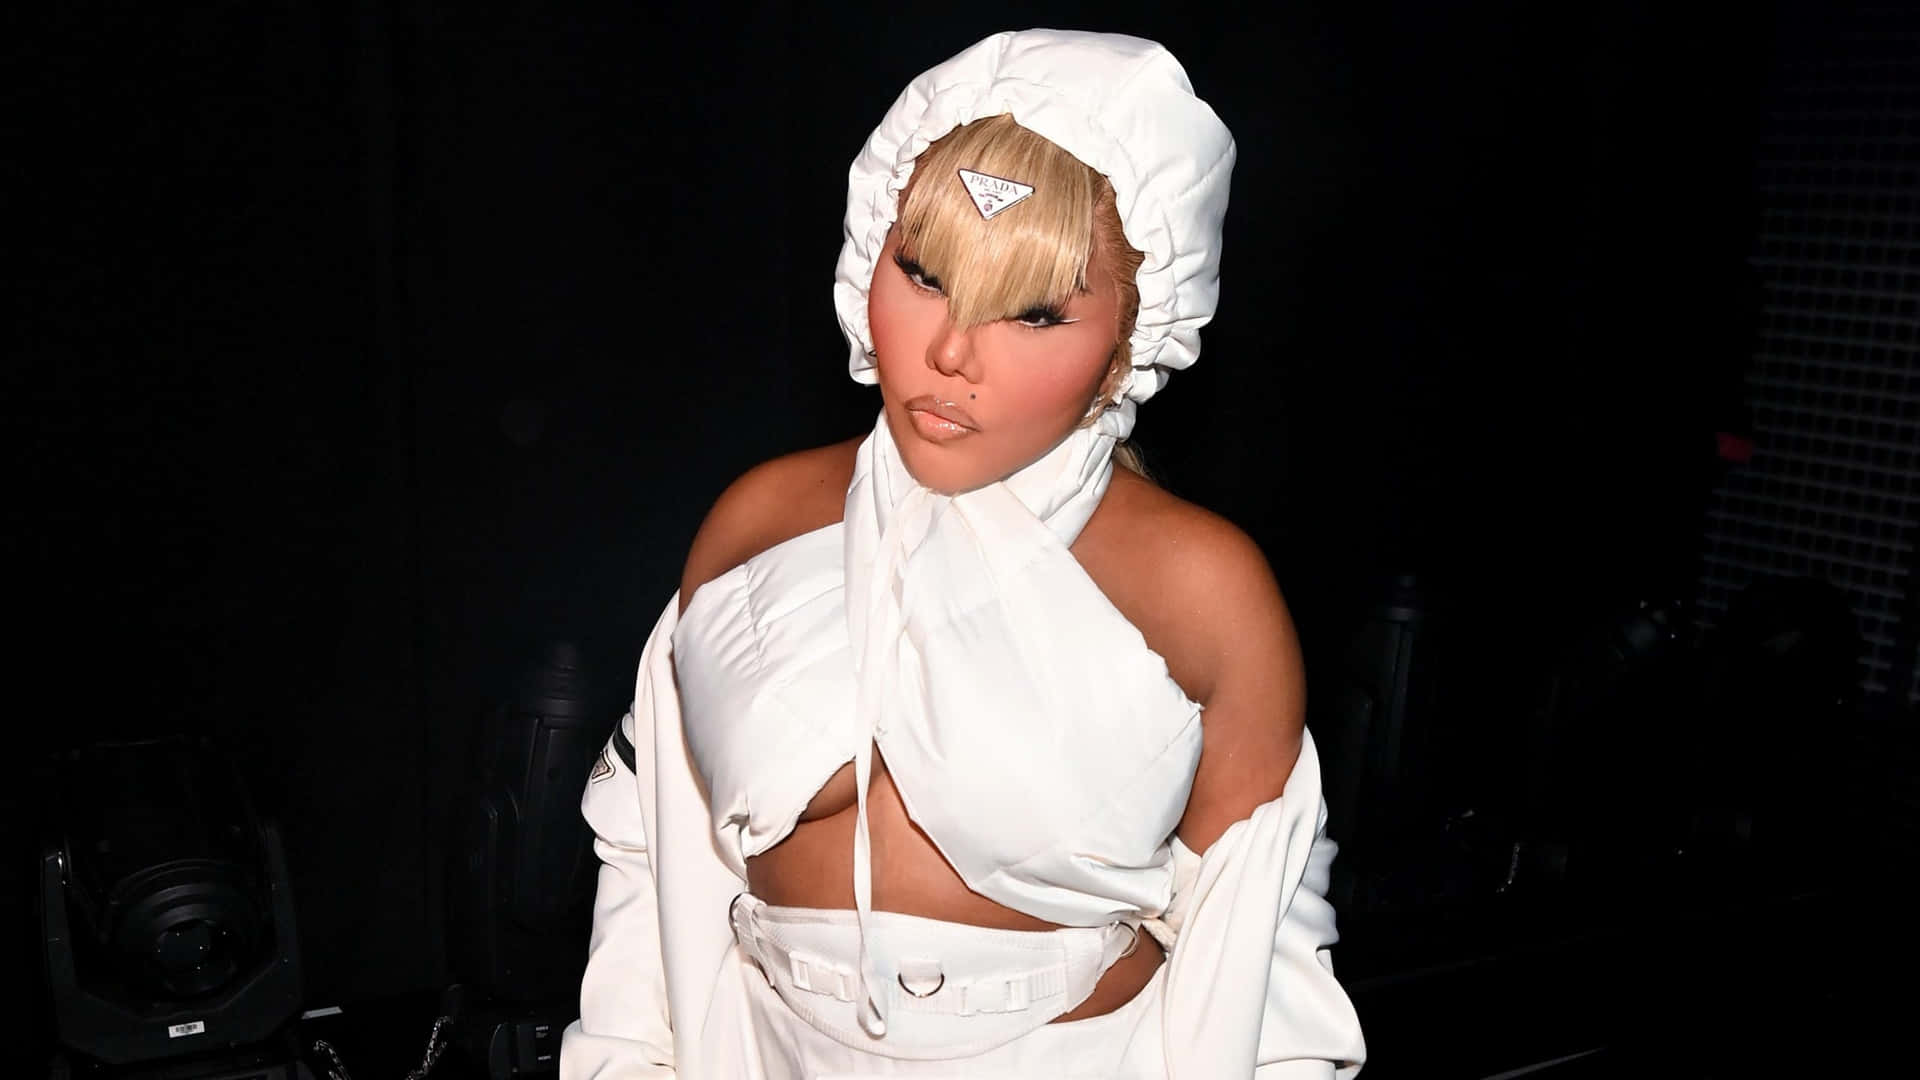 Lil Kim White Outfit Event Wallpaper